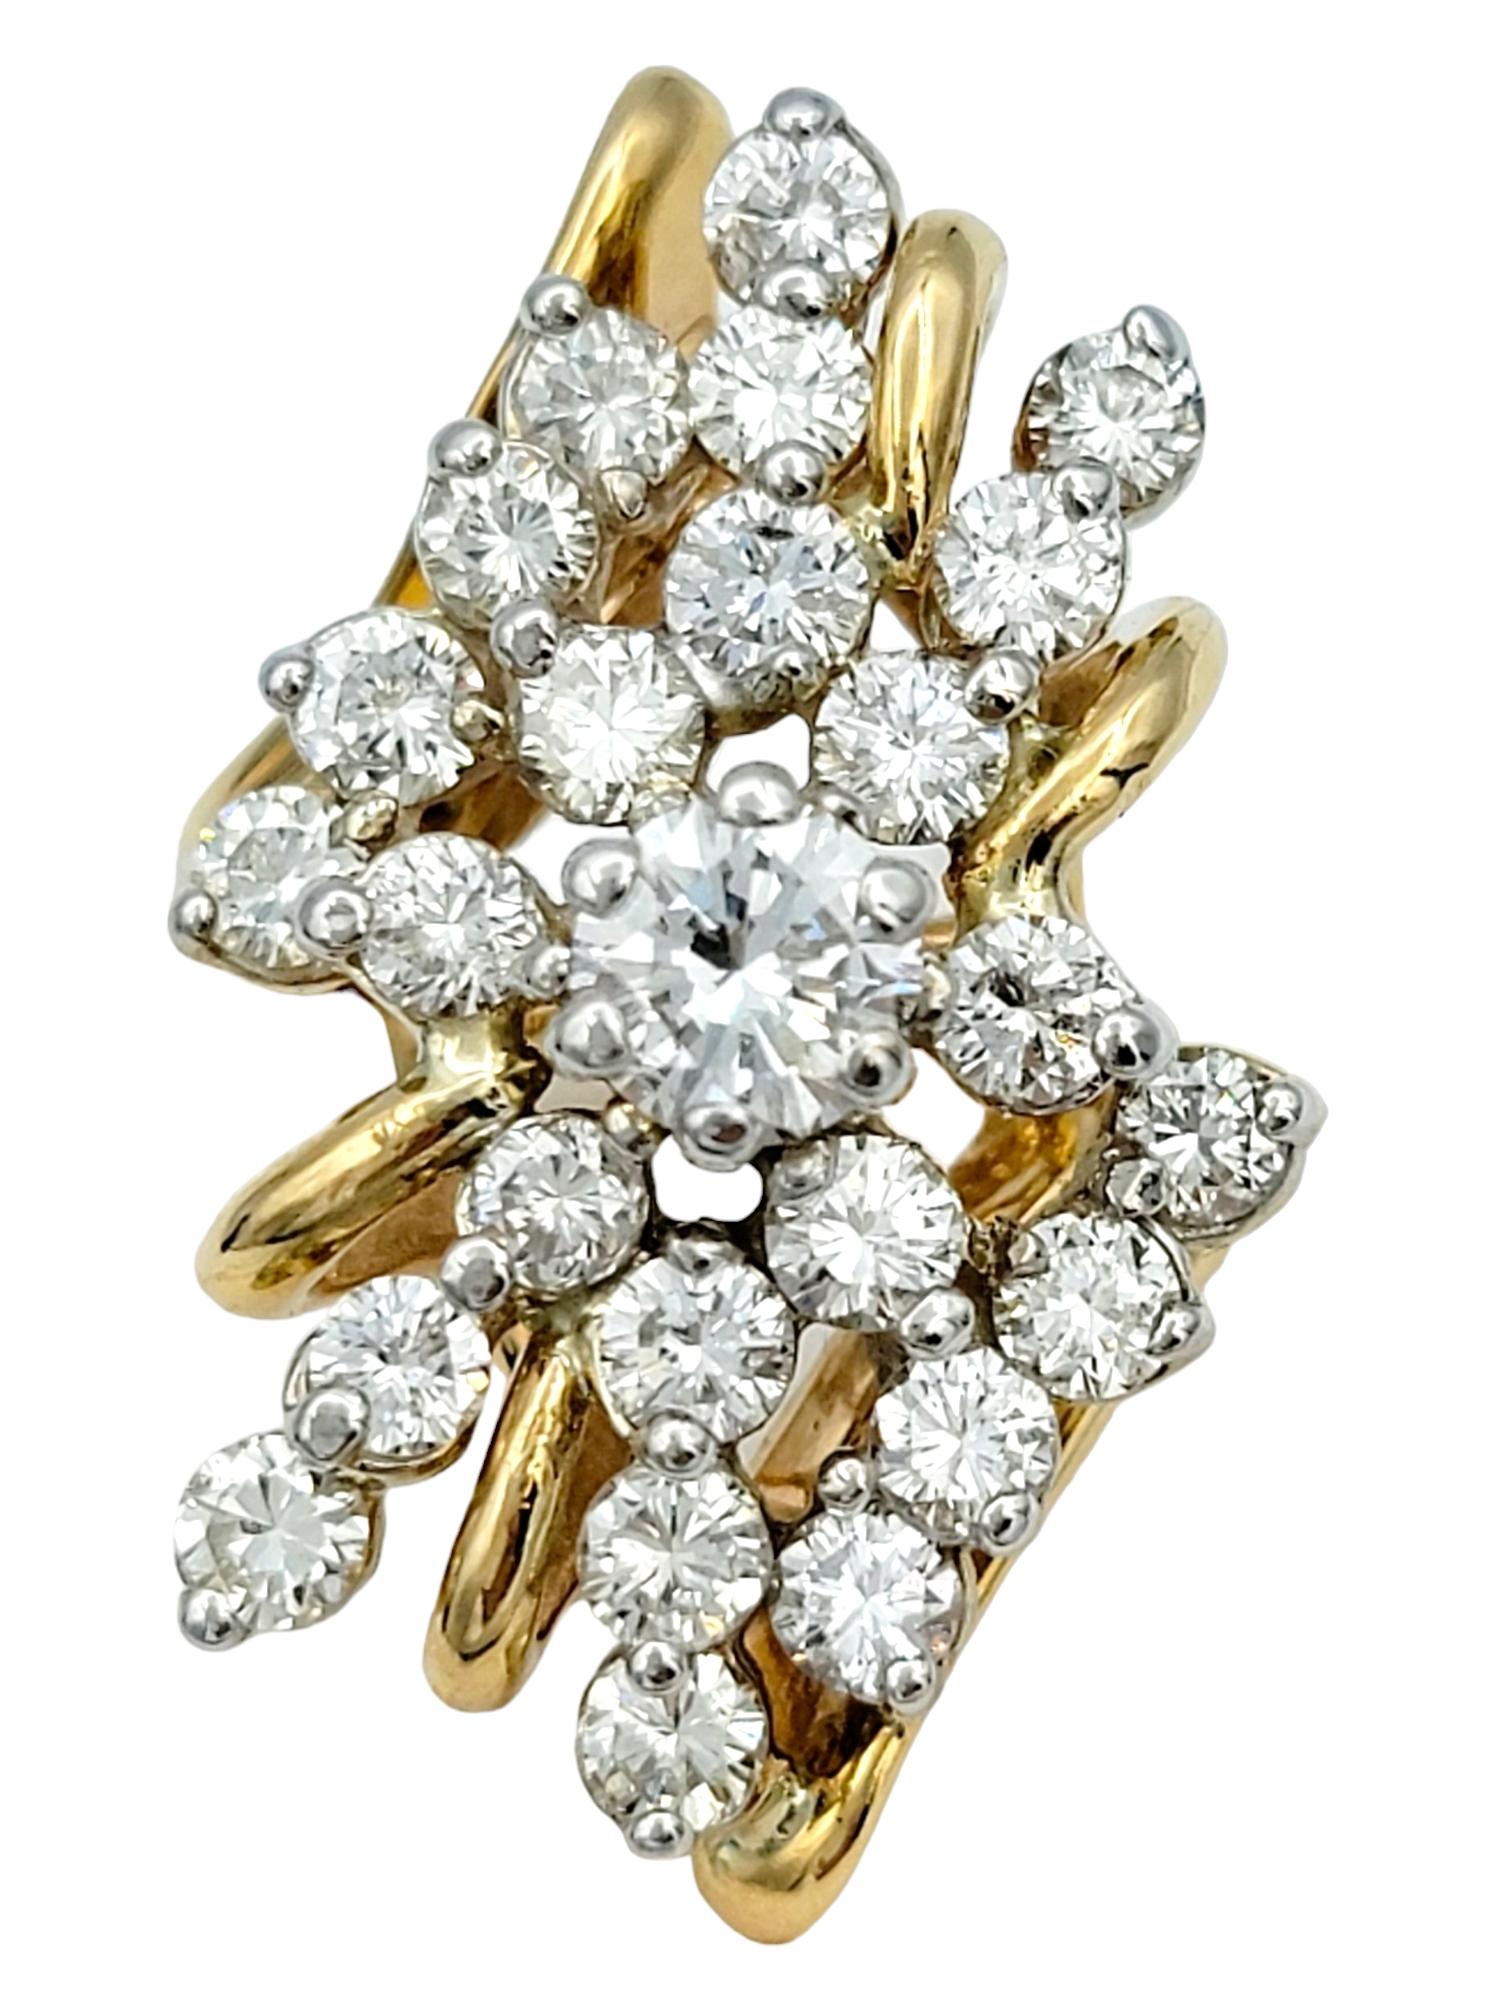 Ring Size: 6.75

This 14-karat yellow gold cocktail ring is a true marvel of design and versatility. Its centerpiece is a clustered assortment of round diamonds artfully arranged to form a captivating elongated marquise shape. The arrangement exudes